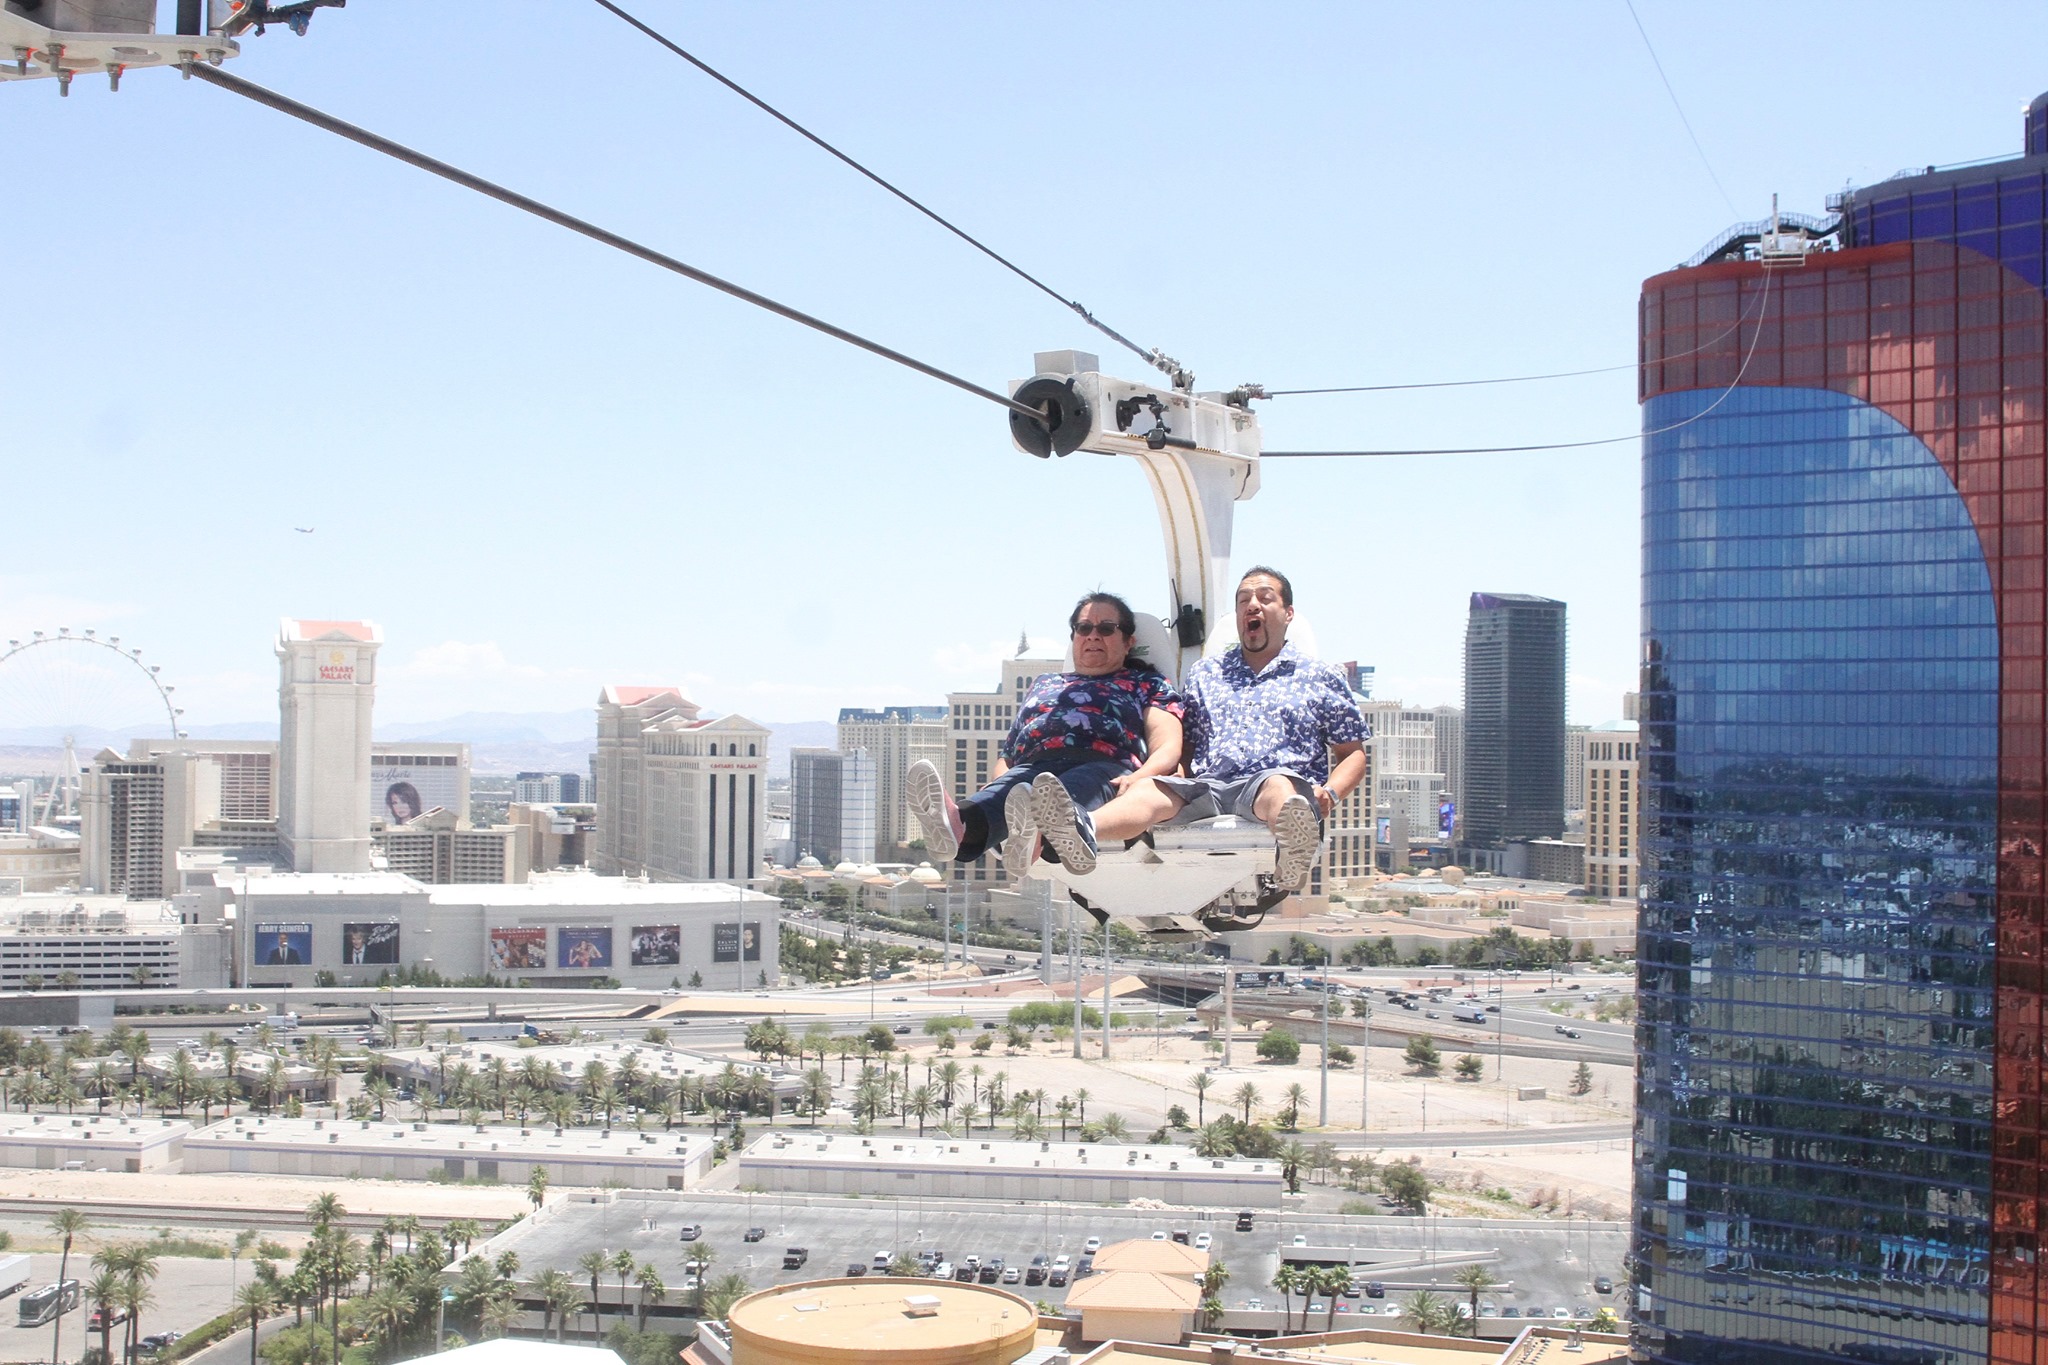 Las Vegas Roller Coasters and Rides To Try